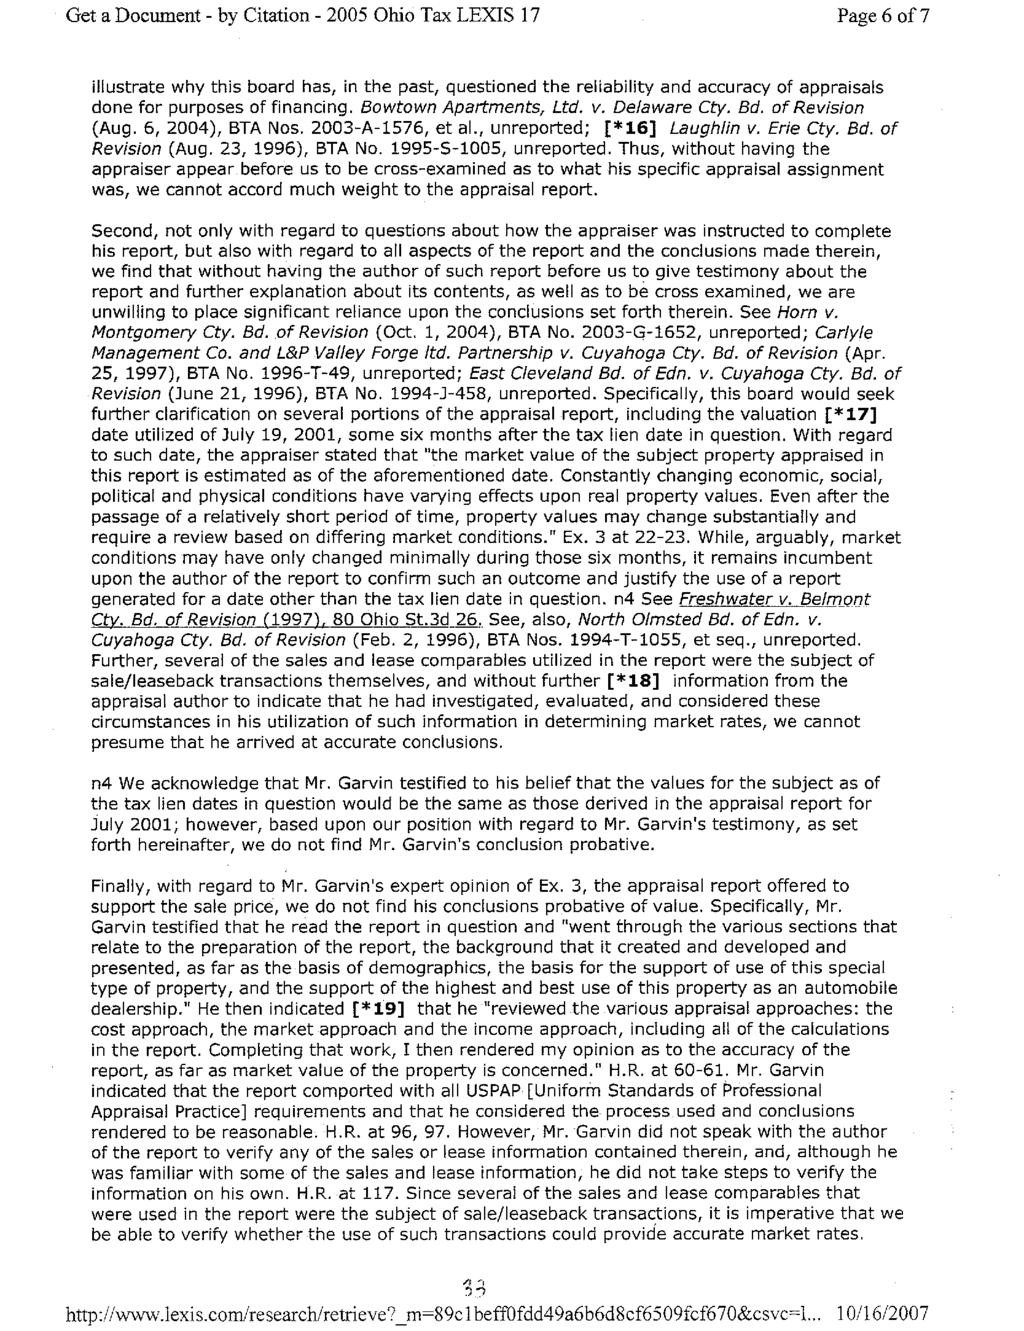 Get a Document - by Citation - 2005 Ohio Tax LEXIS 17 Page 6 of 7 illustrate why this board has, in the past, questioned the reliability and accuracy of appraisals done for purposes of financing.